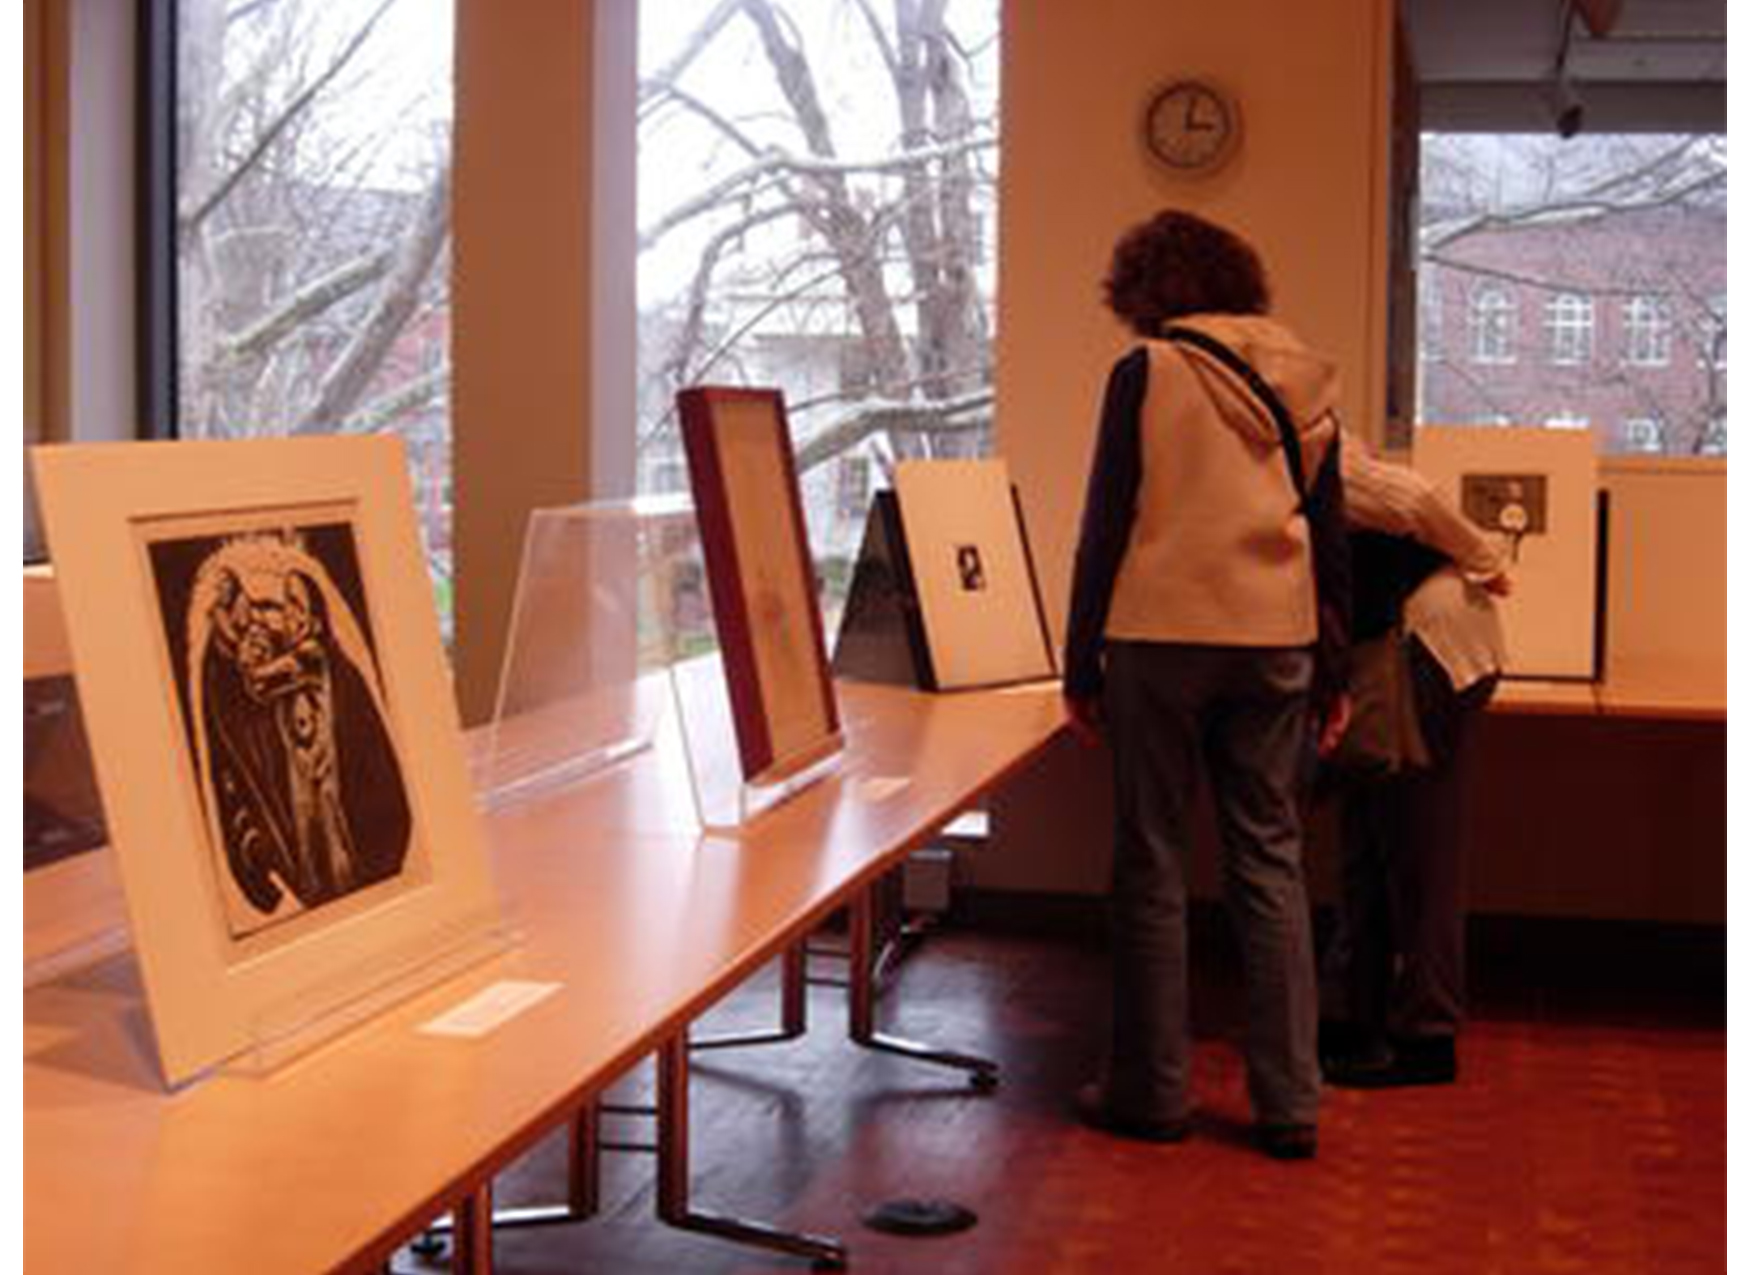 room with tables with printed propped up on them; two people stand in the corner looking closely at one of the prints with their backs to the viewer